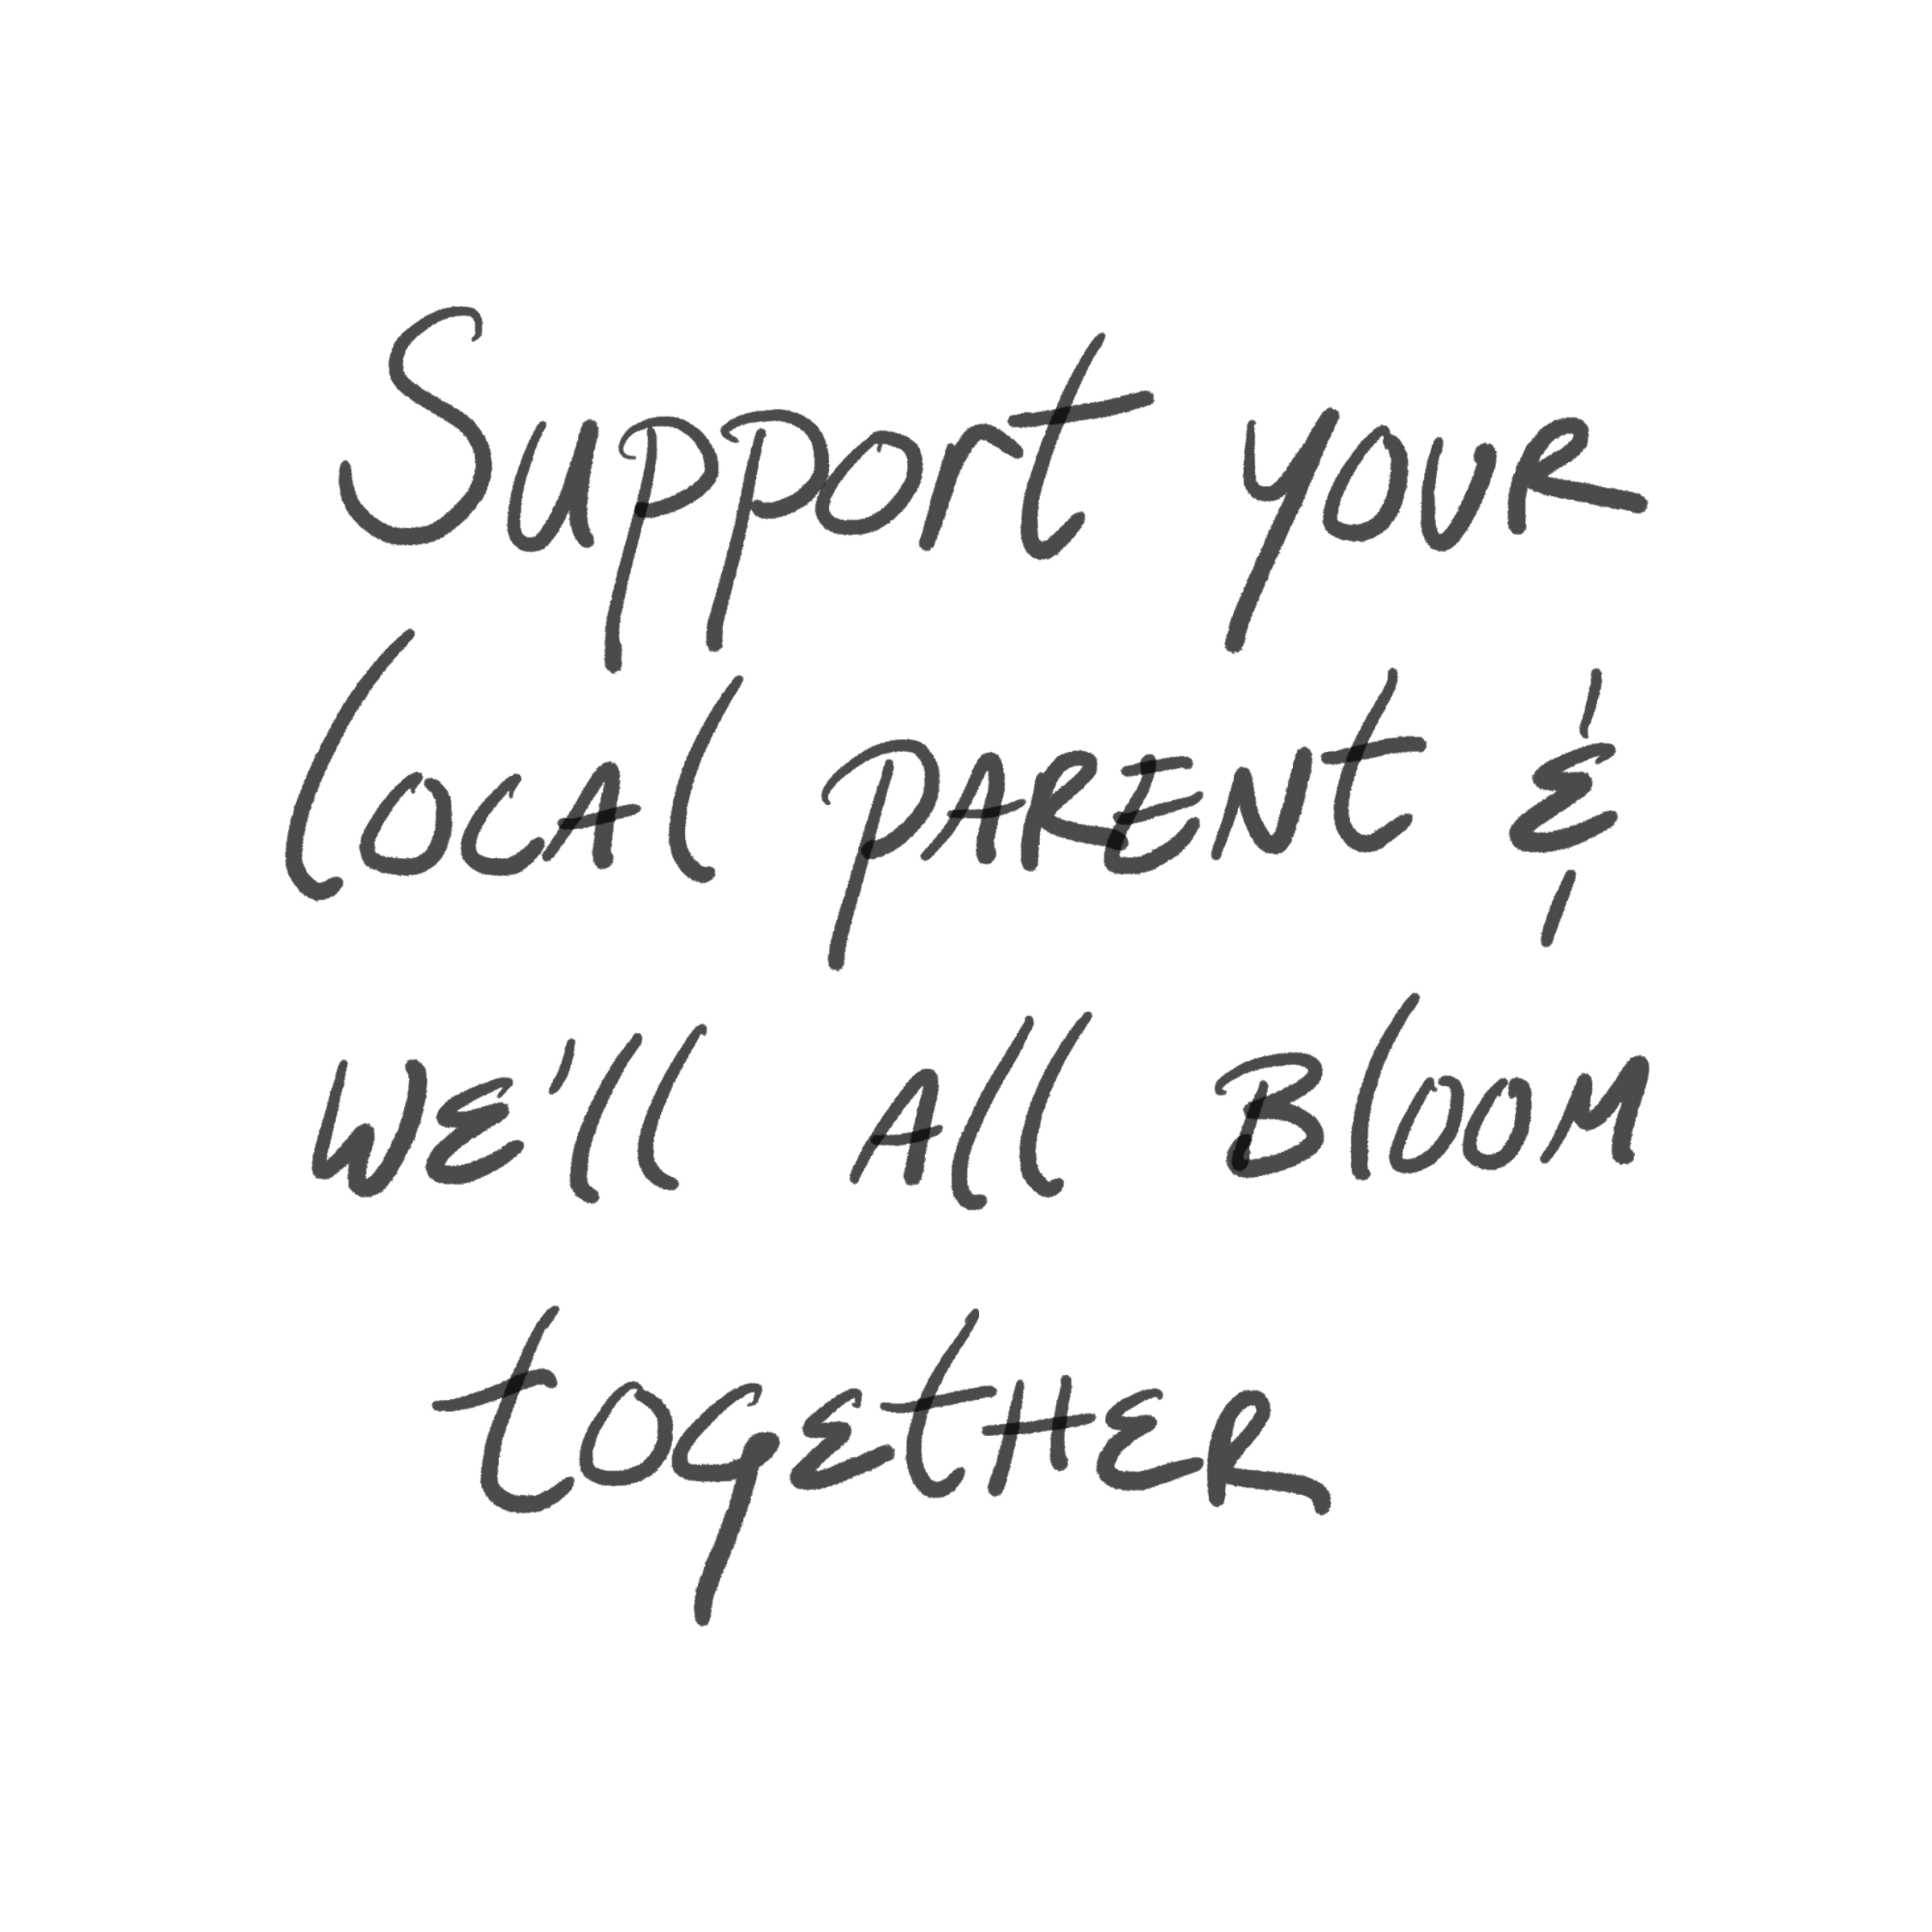 Support your local parent and we'll all bloom together.